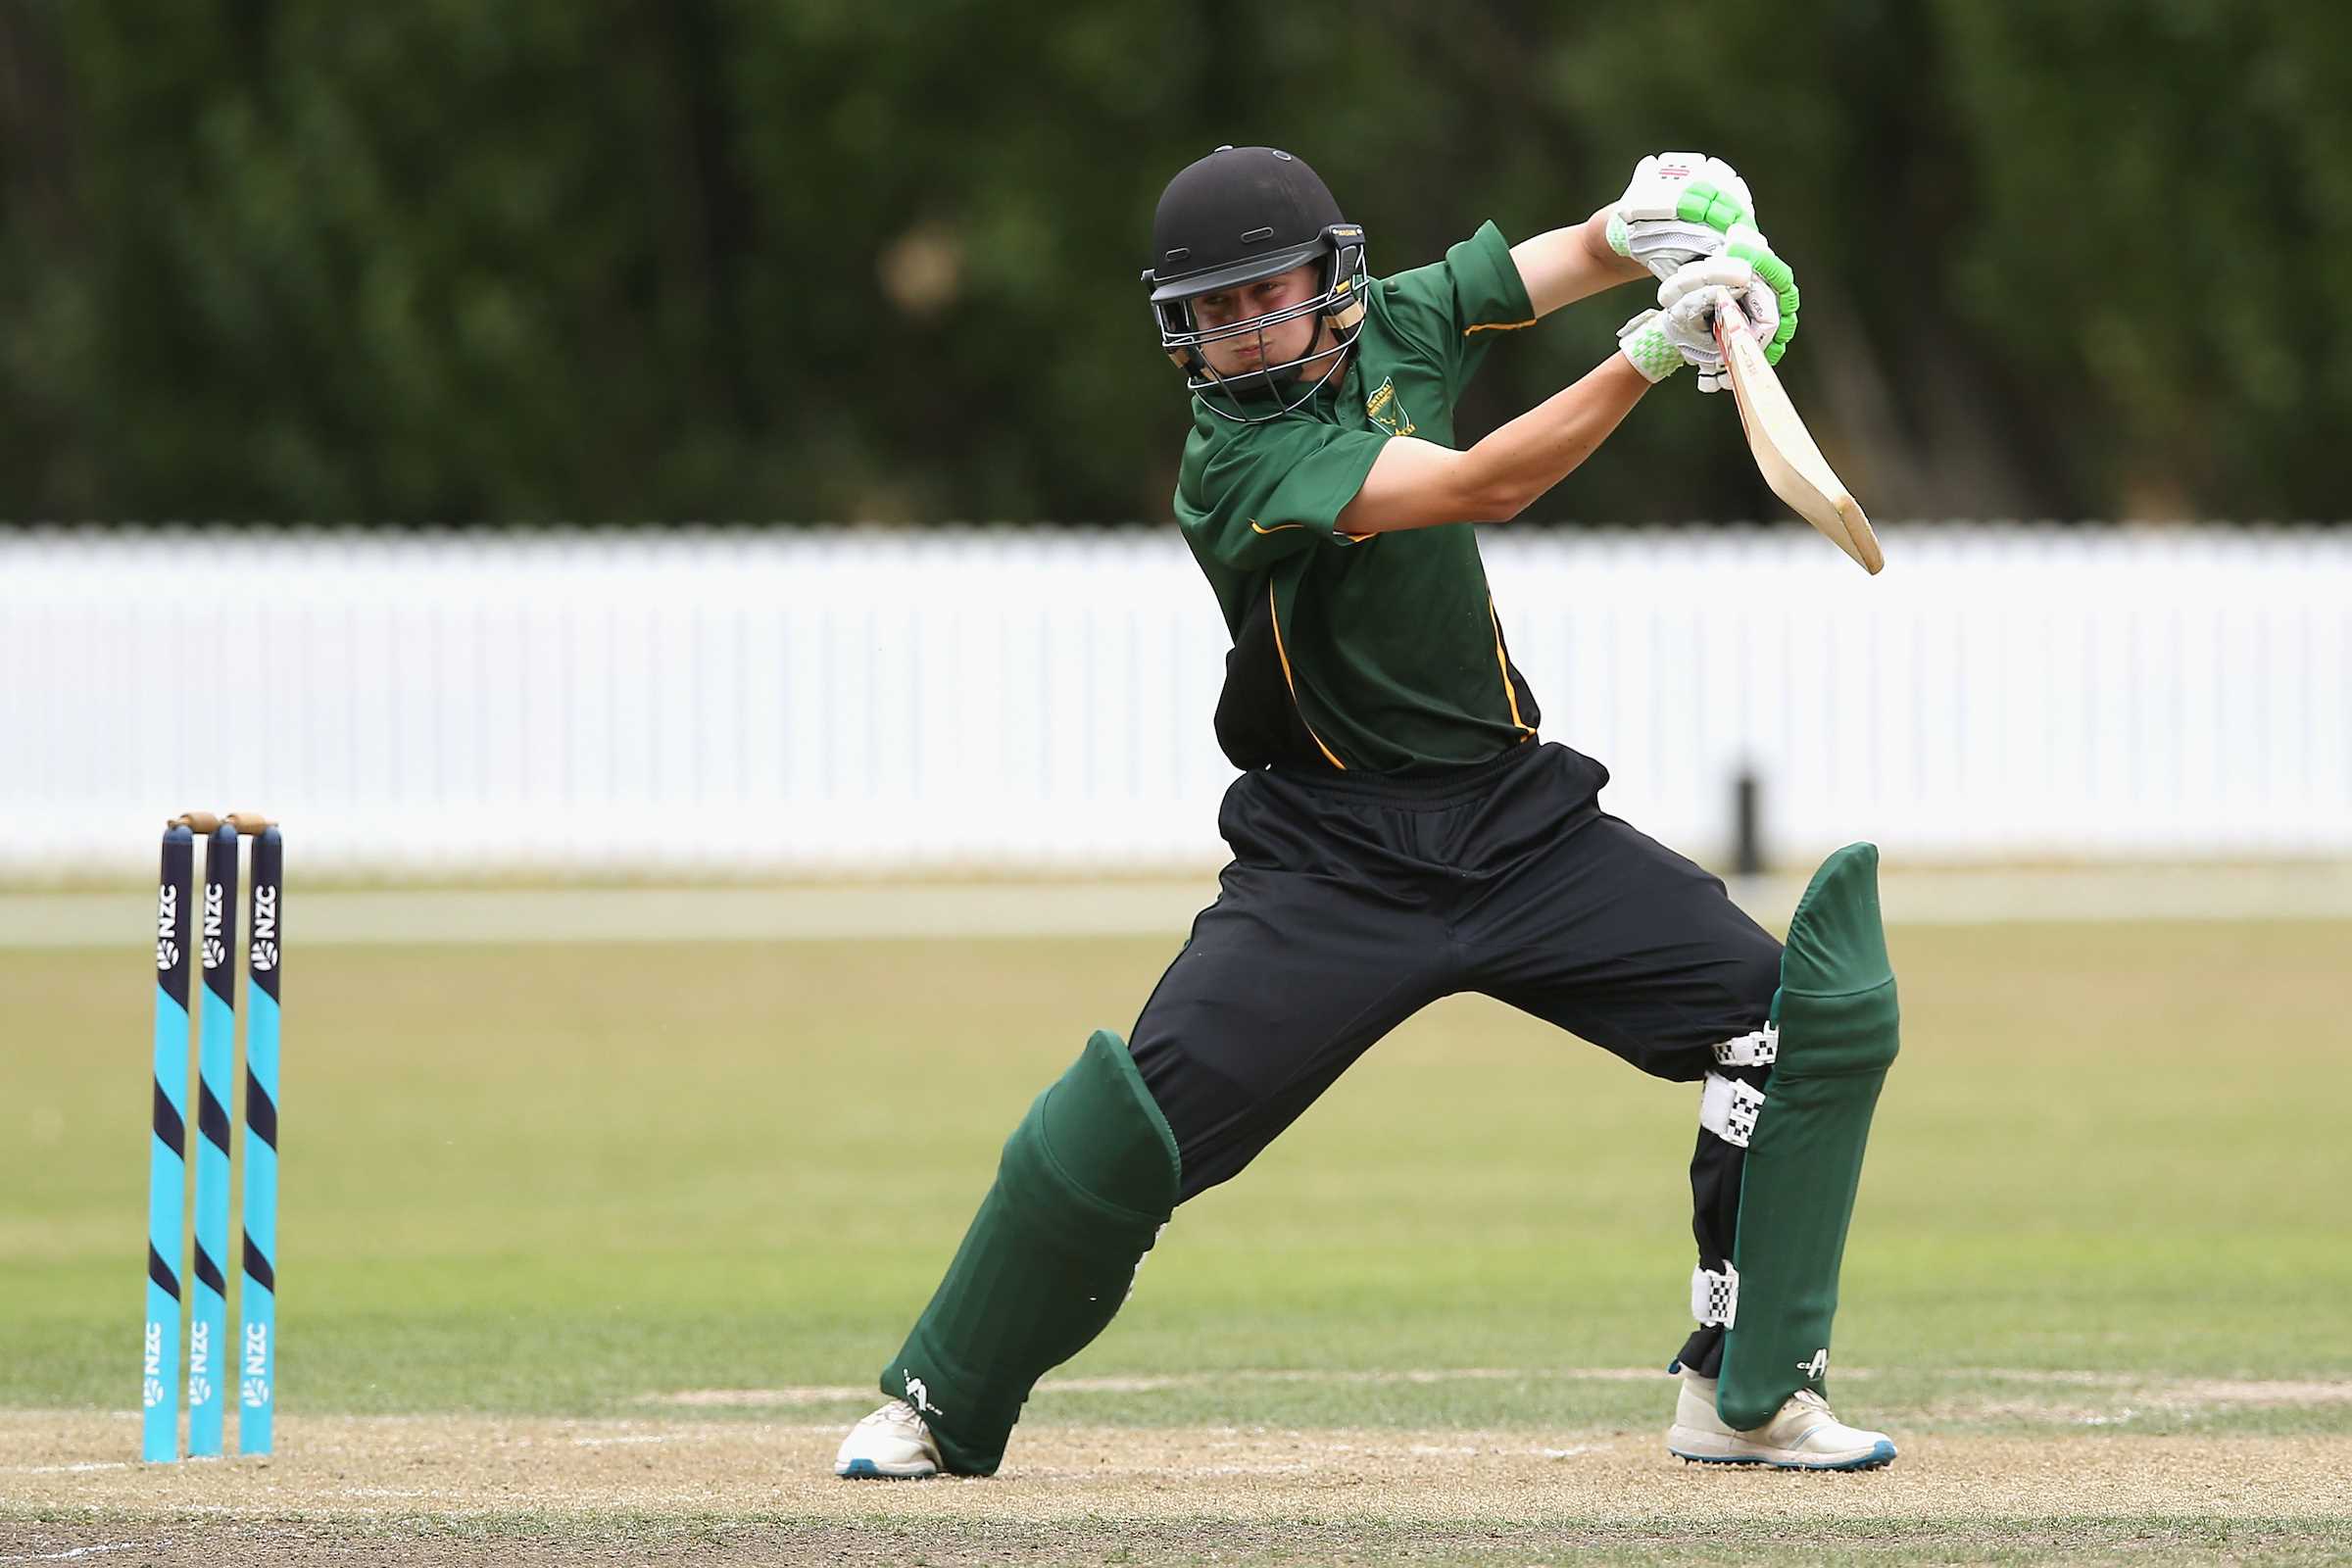 Action from the final day of the National Men's Under 17 cricket tournament held at Lincoln,  Christchurch, New Zealand, 11 January 2020. Copyright Image: Martin Hunter / www.Photosport.nz